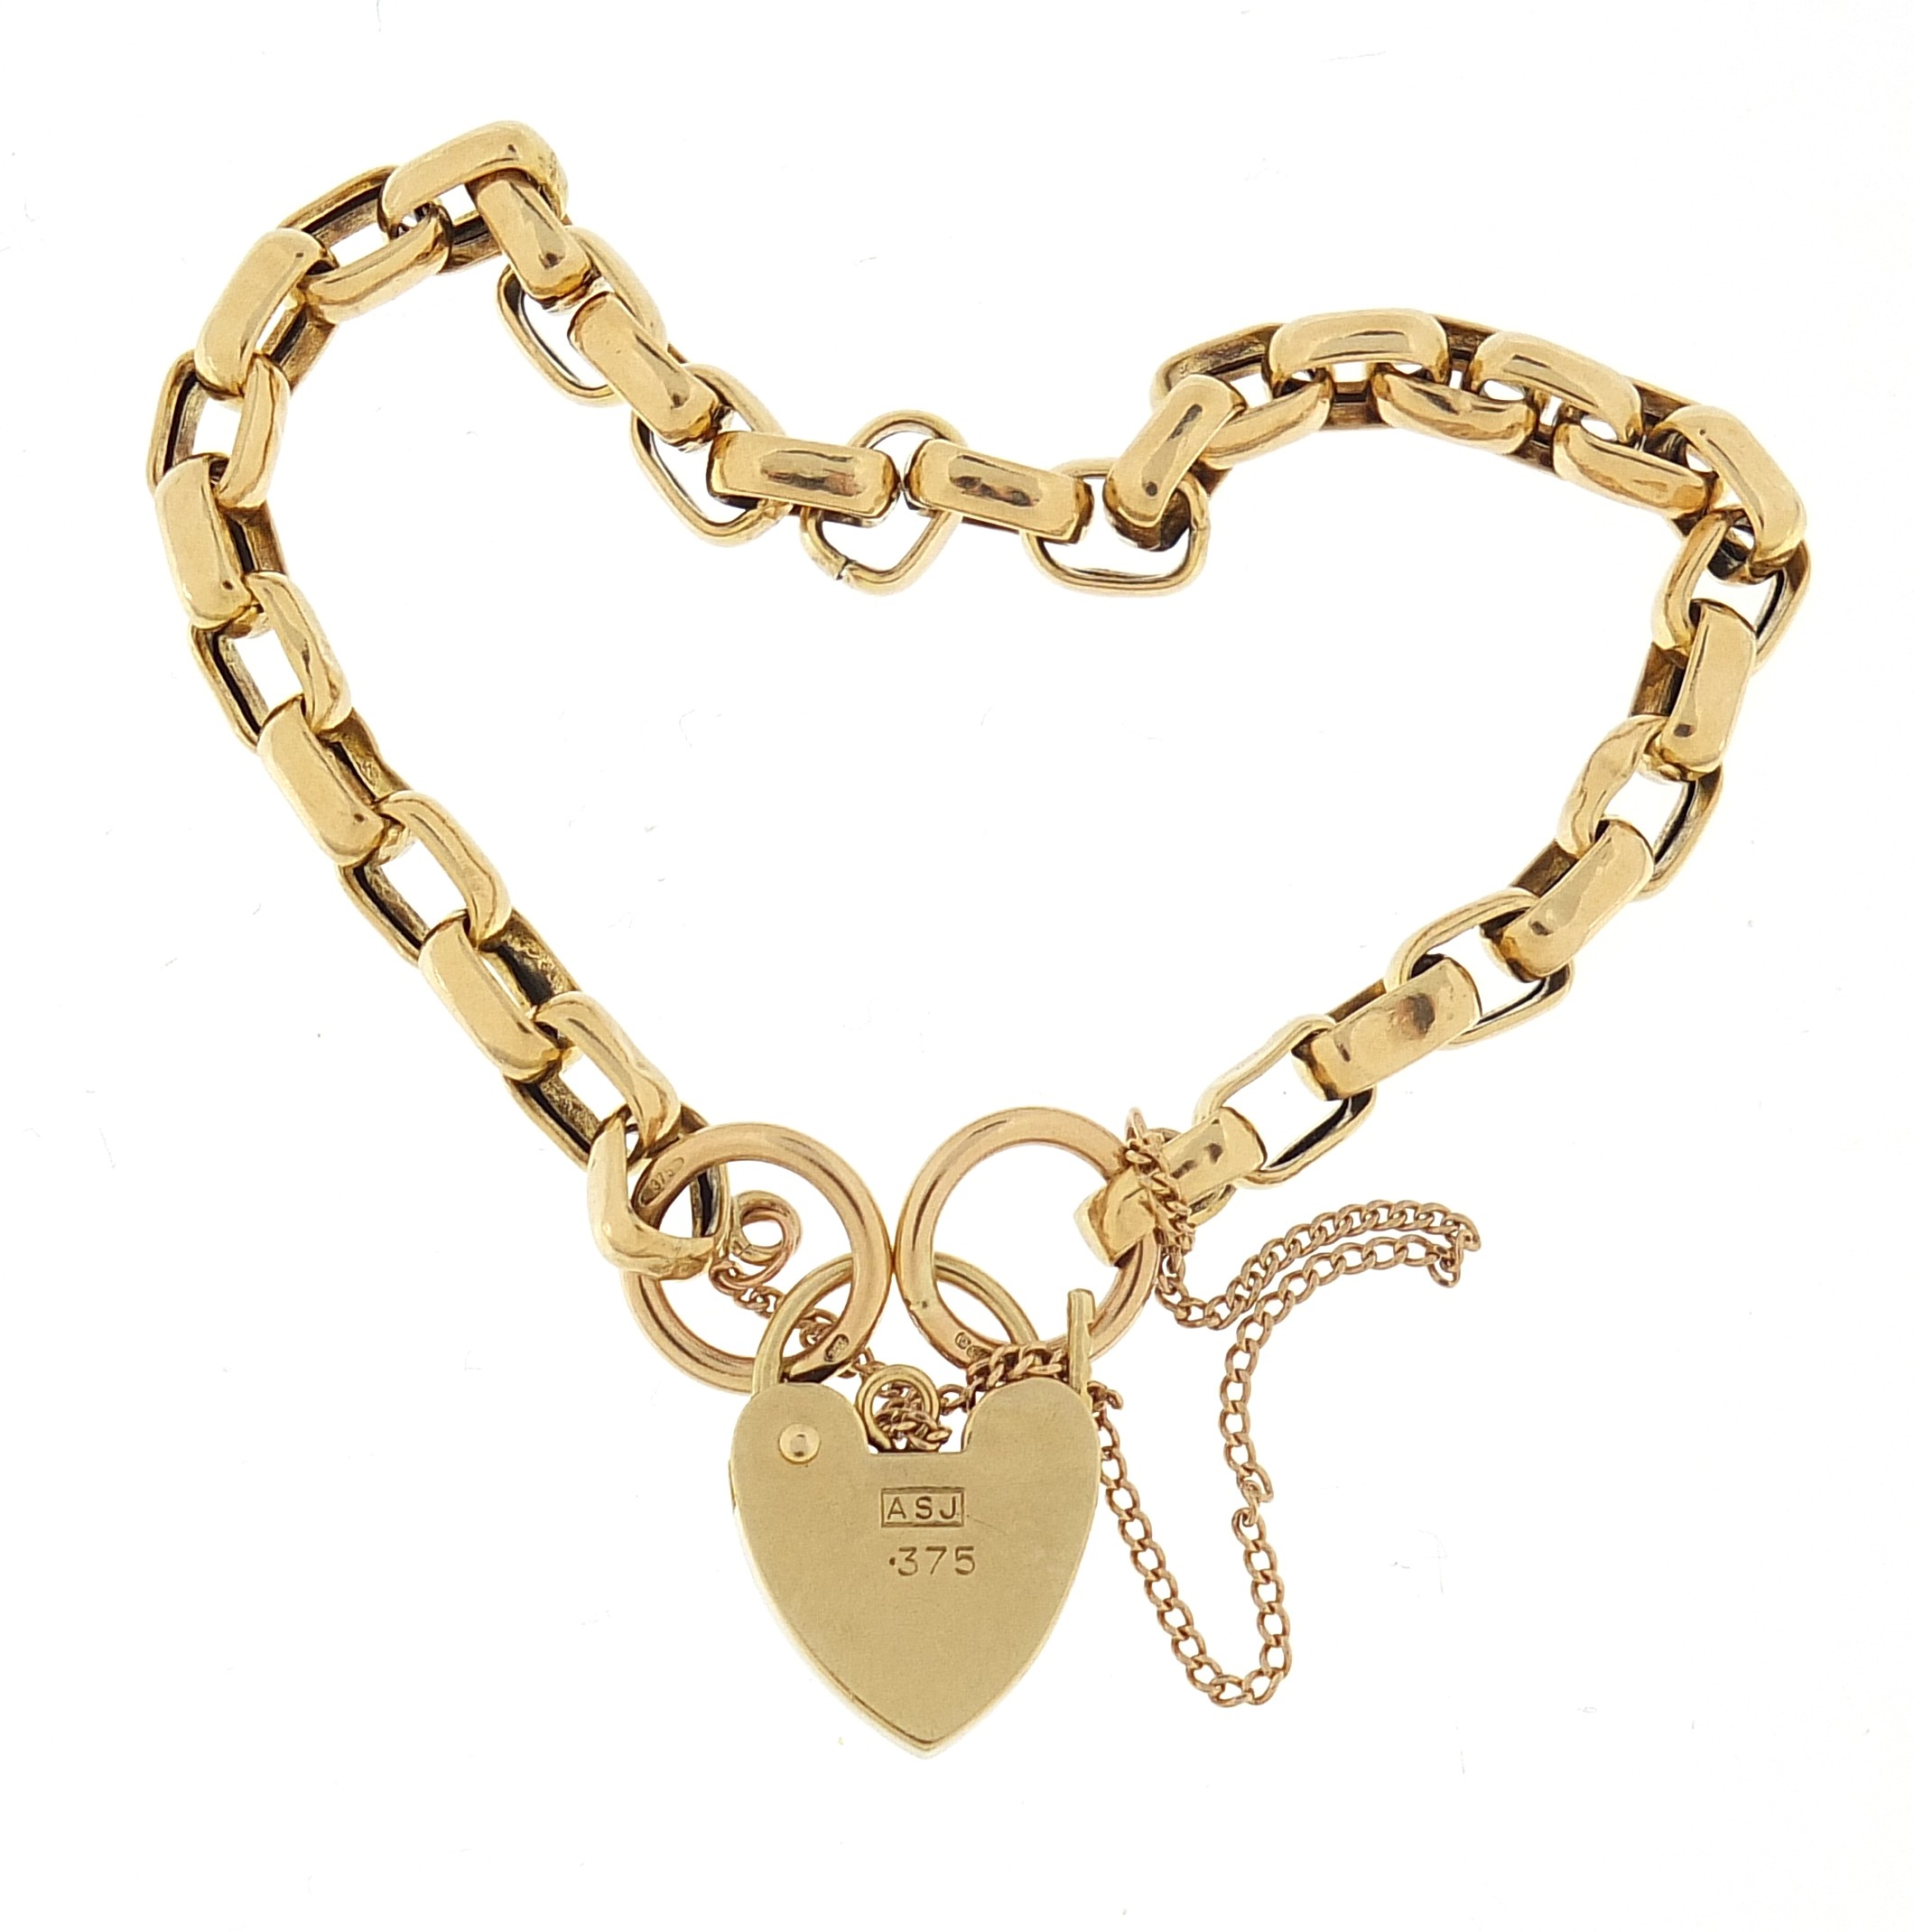 9ct gold long Belcher link bracelet with love heart padlock, 18cm in length, 7.5g - this lot is sold - Image 3 of 4